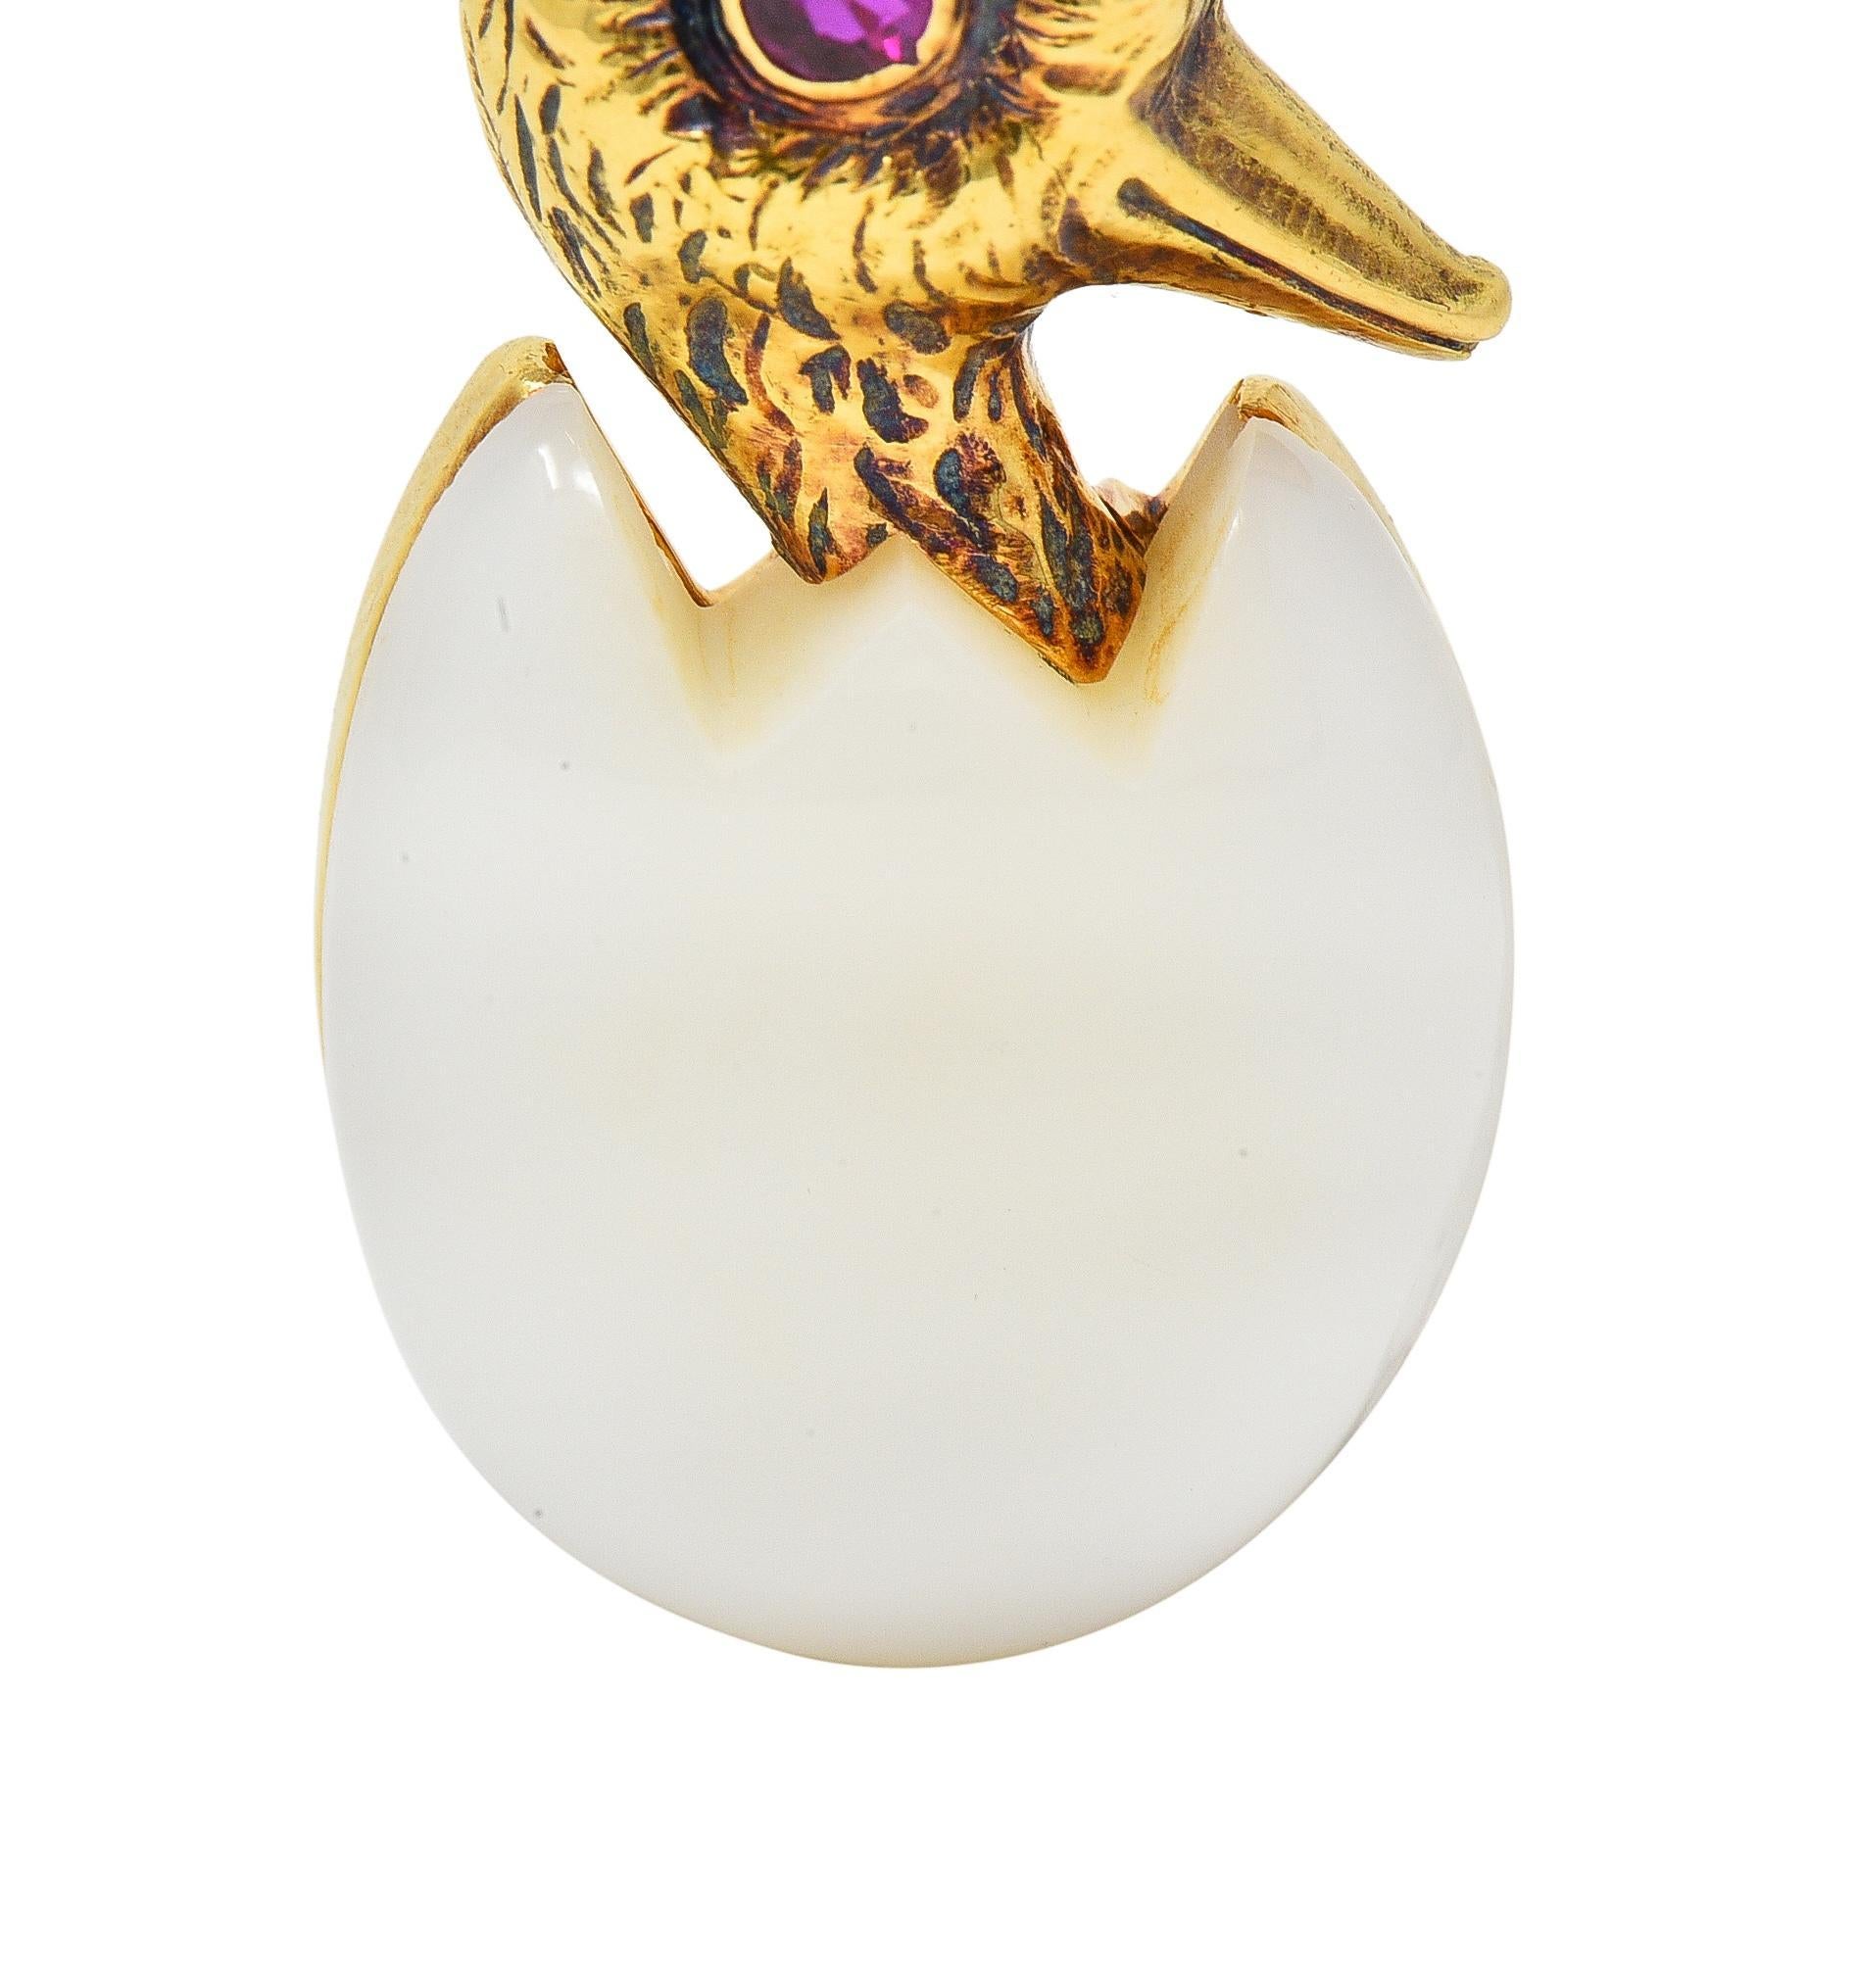 Cartier France 1960's Ruby Chalcedony 18 Karat Yellow Gold Hatching Bird Brooch For Sale 3